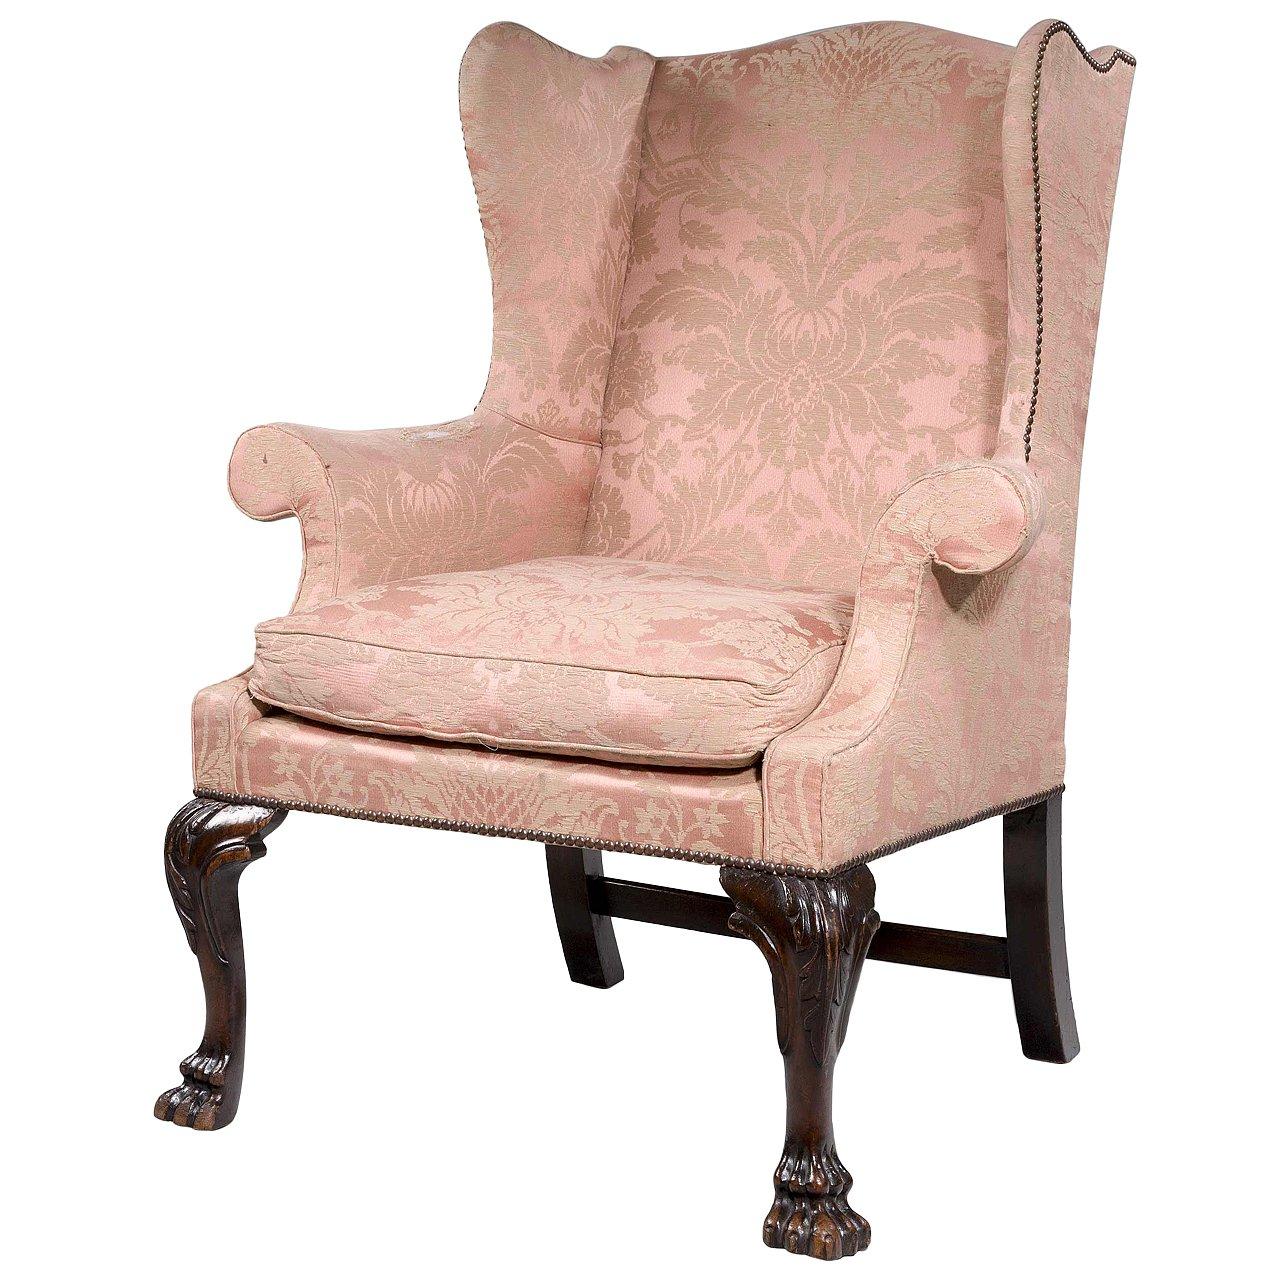 George II Period, Mahogany Framed Wing Chair of Small Proportions